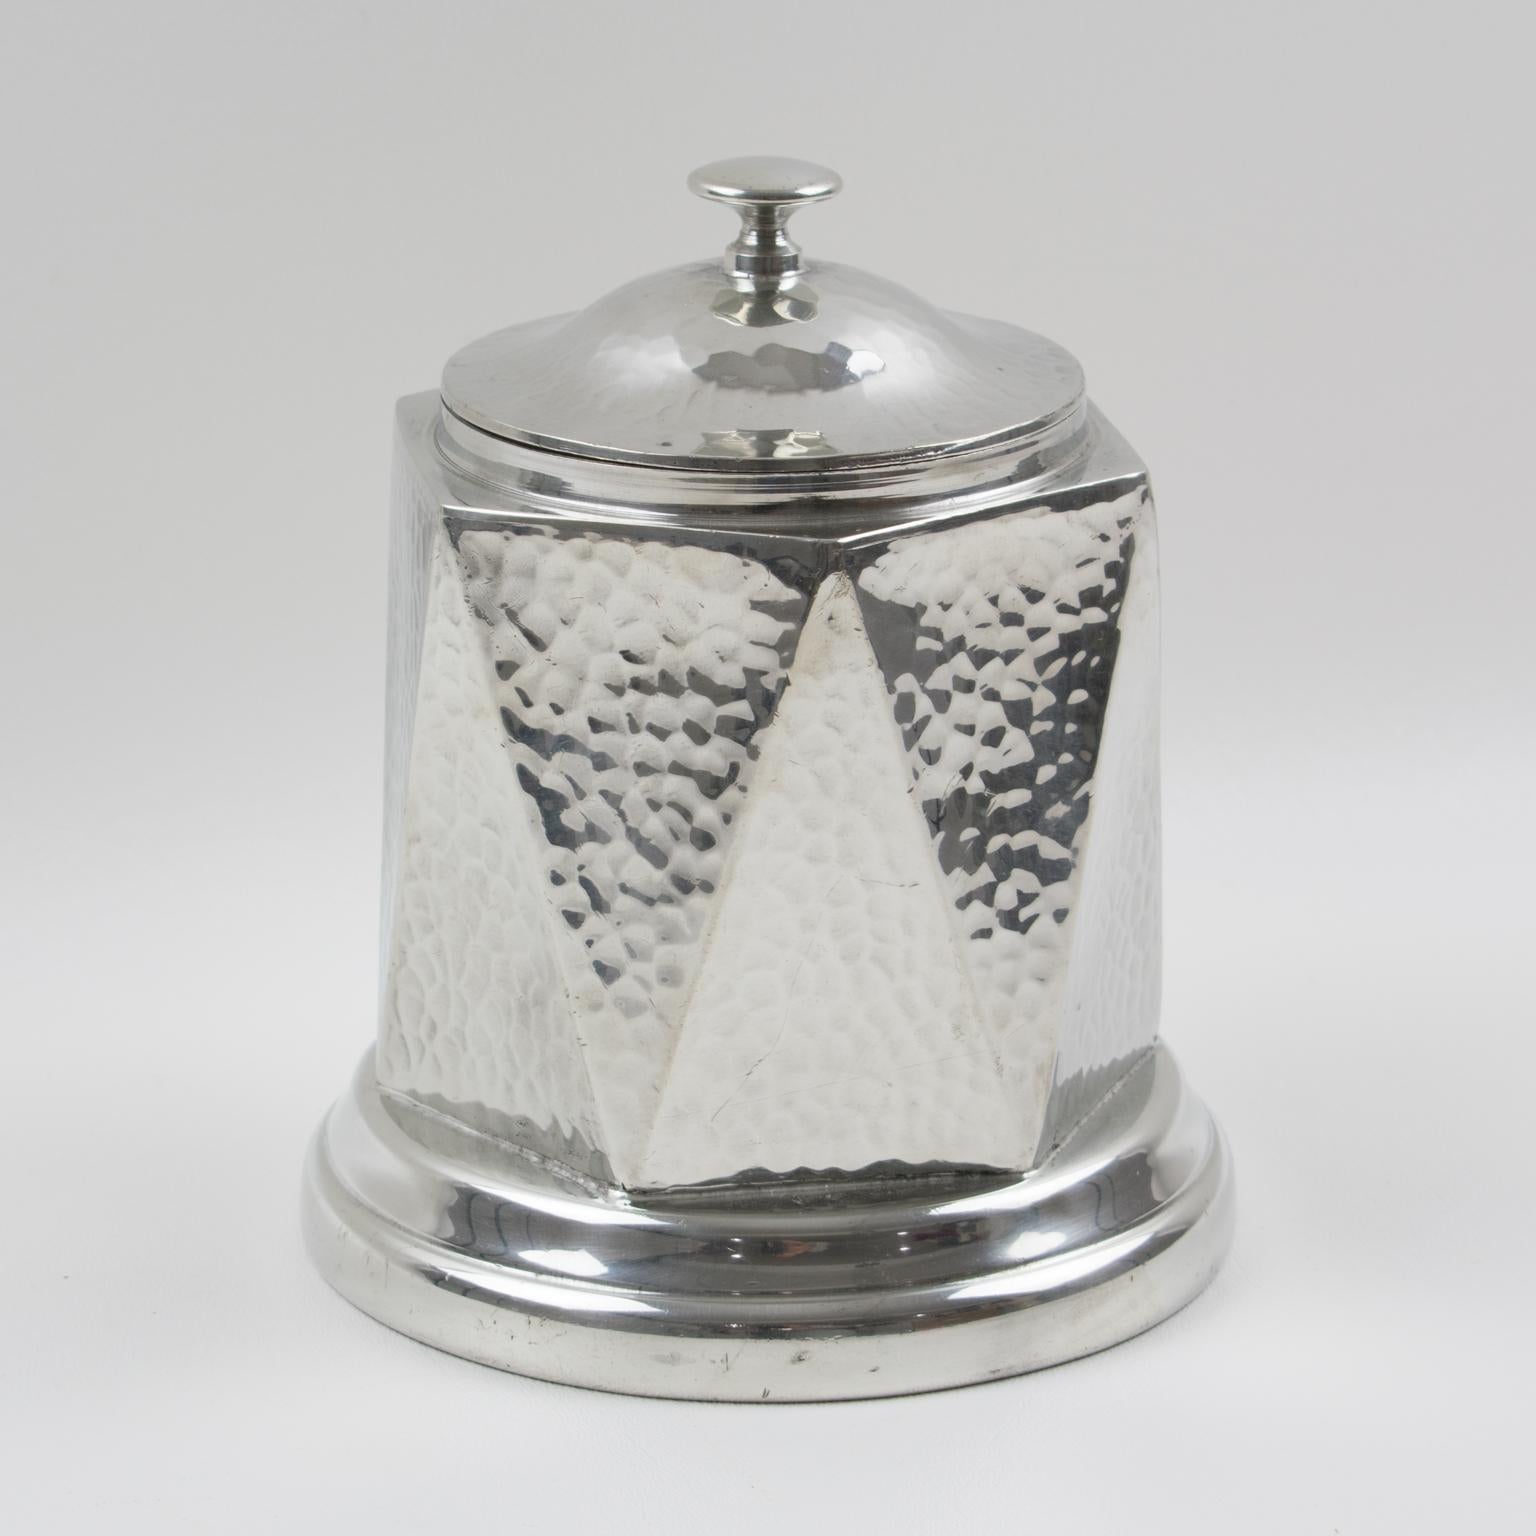 This elegant English Art Deco geometric hand-hammered dinanderie polished-pewter-covered decorative box or tea caddy was manufactured by A.E. Poston & Company, Birmingham, England, for their Knighthood Old English Pewter Collection. The lovely